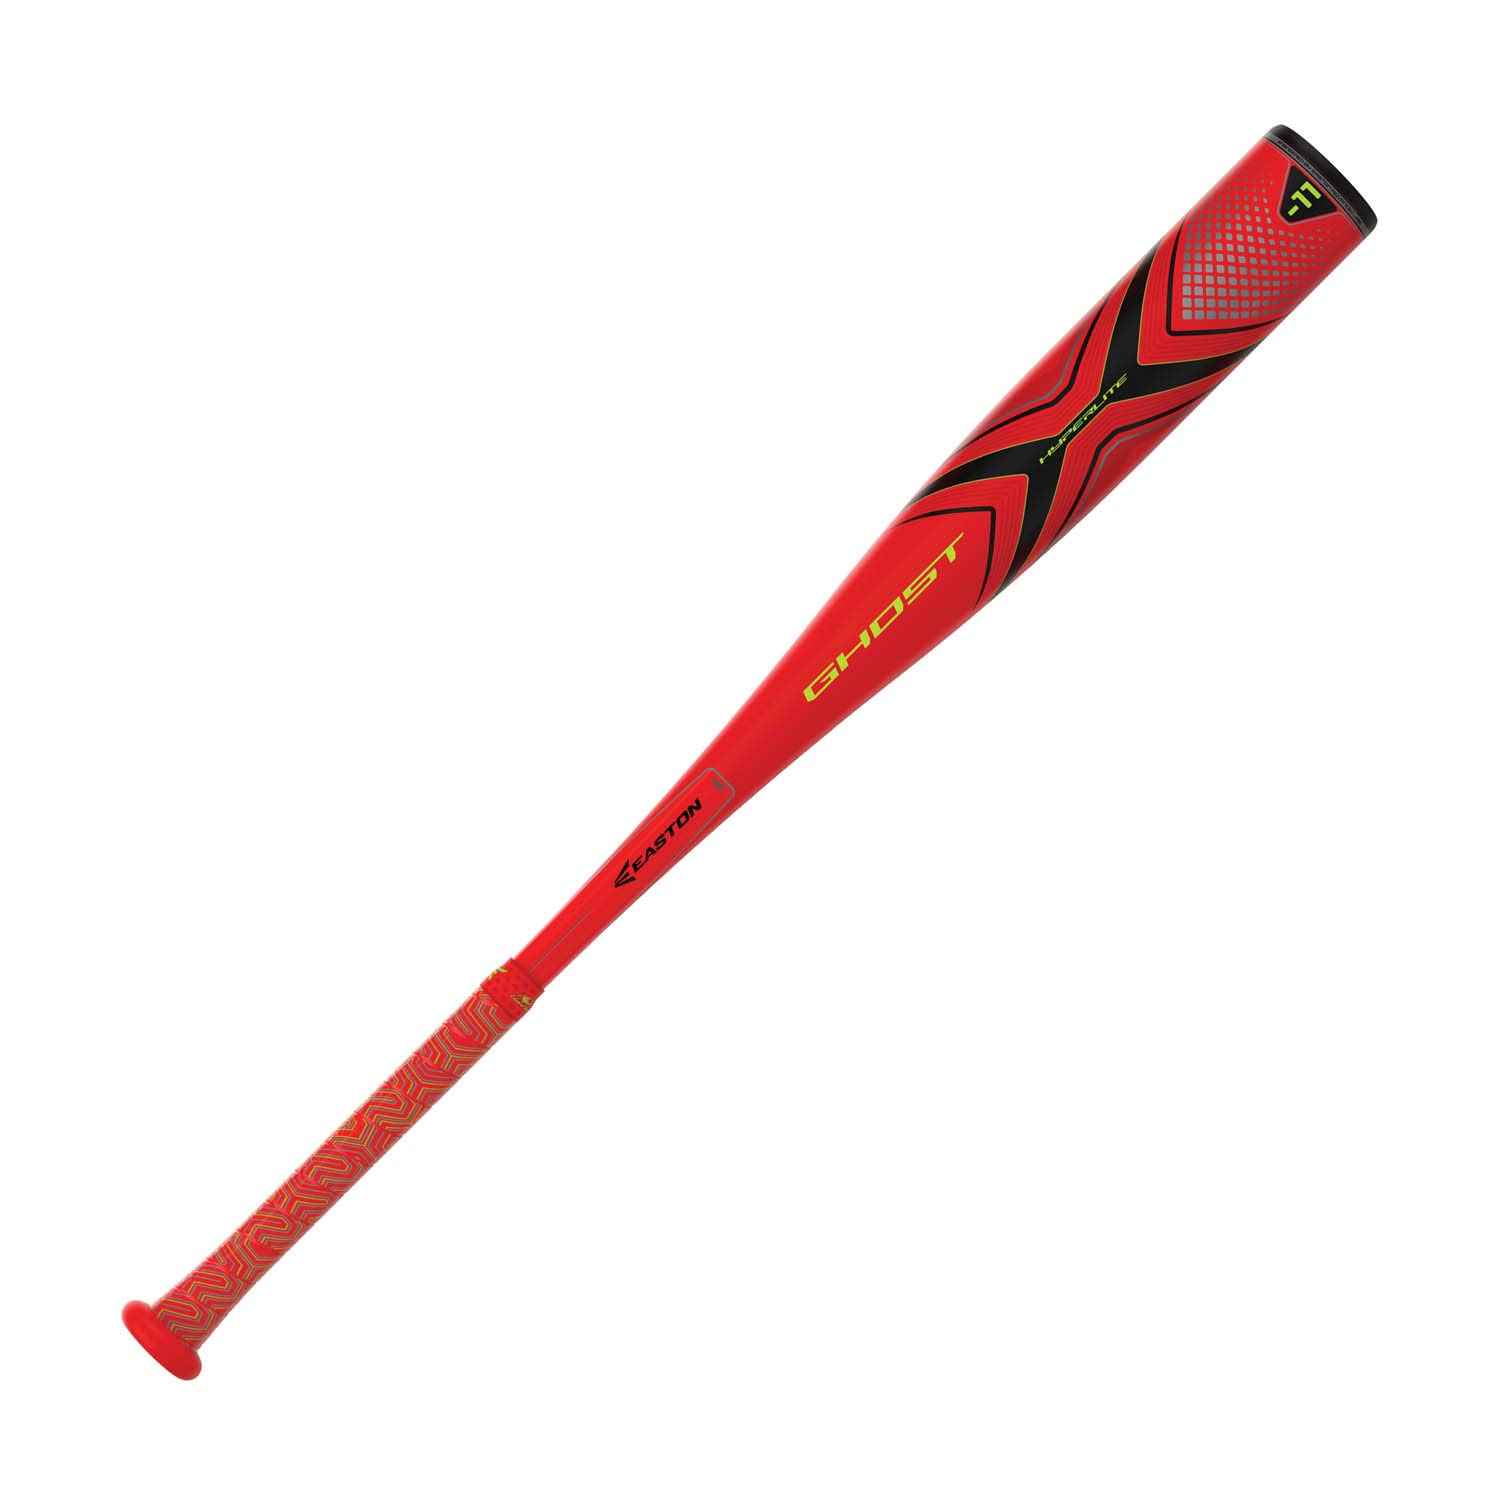 2 5/8 barrel. EXACT Carbon –Engineering x Advanced Carbon Technology 1-piece construction provides better feeling in the hands and optimized barrel performance New SPEEDCAP provides a more flexible and responsive barrel while also enhancing the sound of the bat 1-piece HYPERLITE balanced design provides a lightweight swing weight for more speed behind the ball at contact Custom LIZARD SKINS DSP bat grip provides the ultimate feel, cushion and tack.